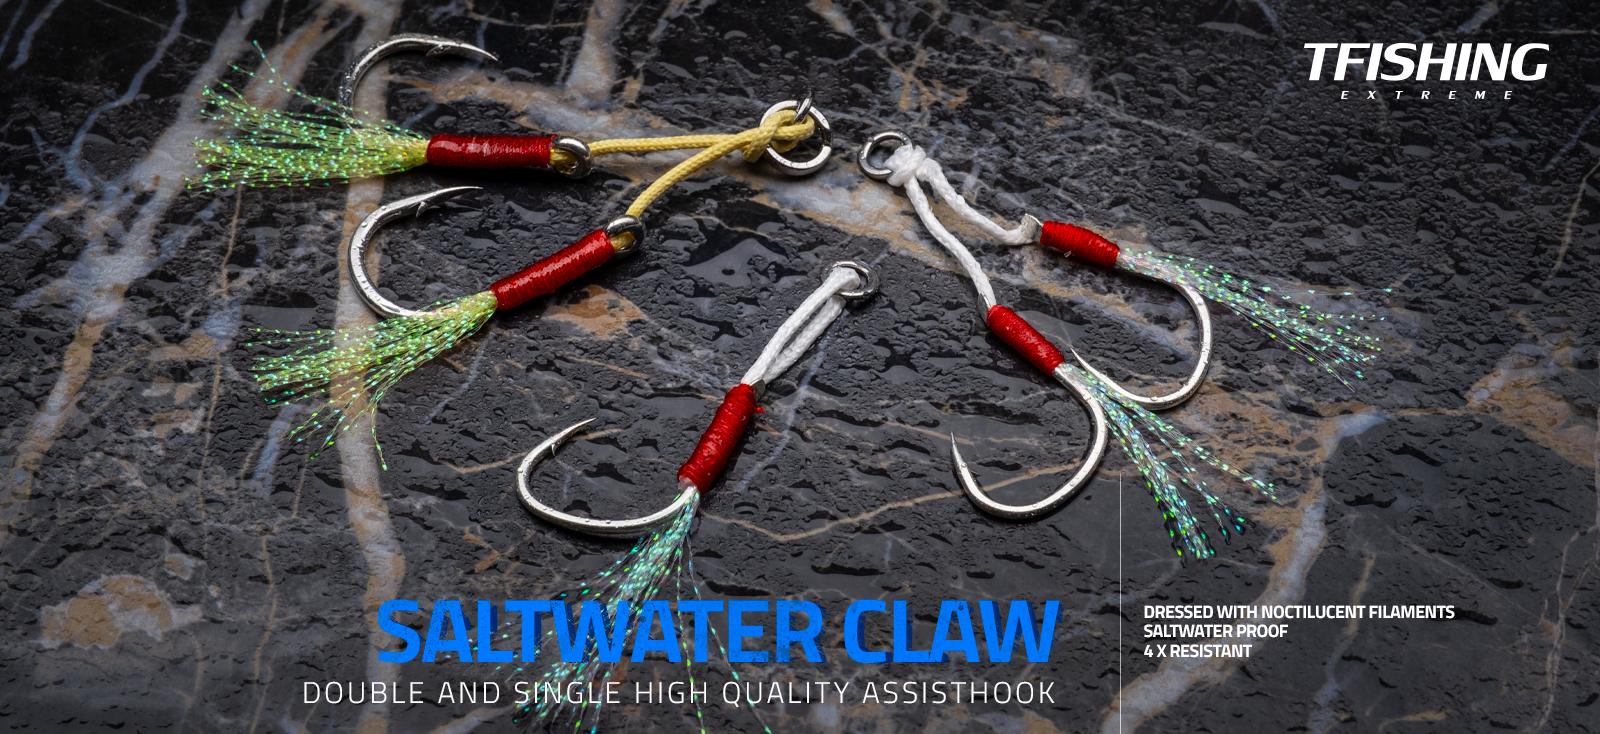 T-Fishing Extrem Saltwater Claw